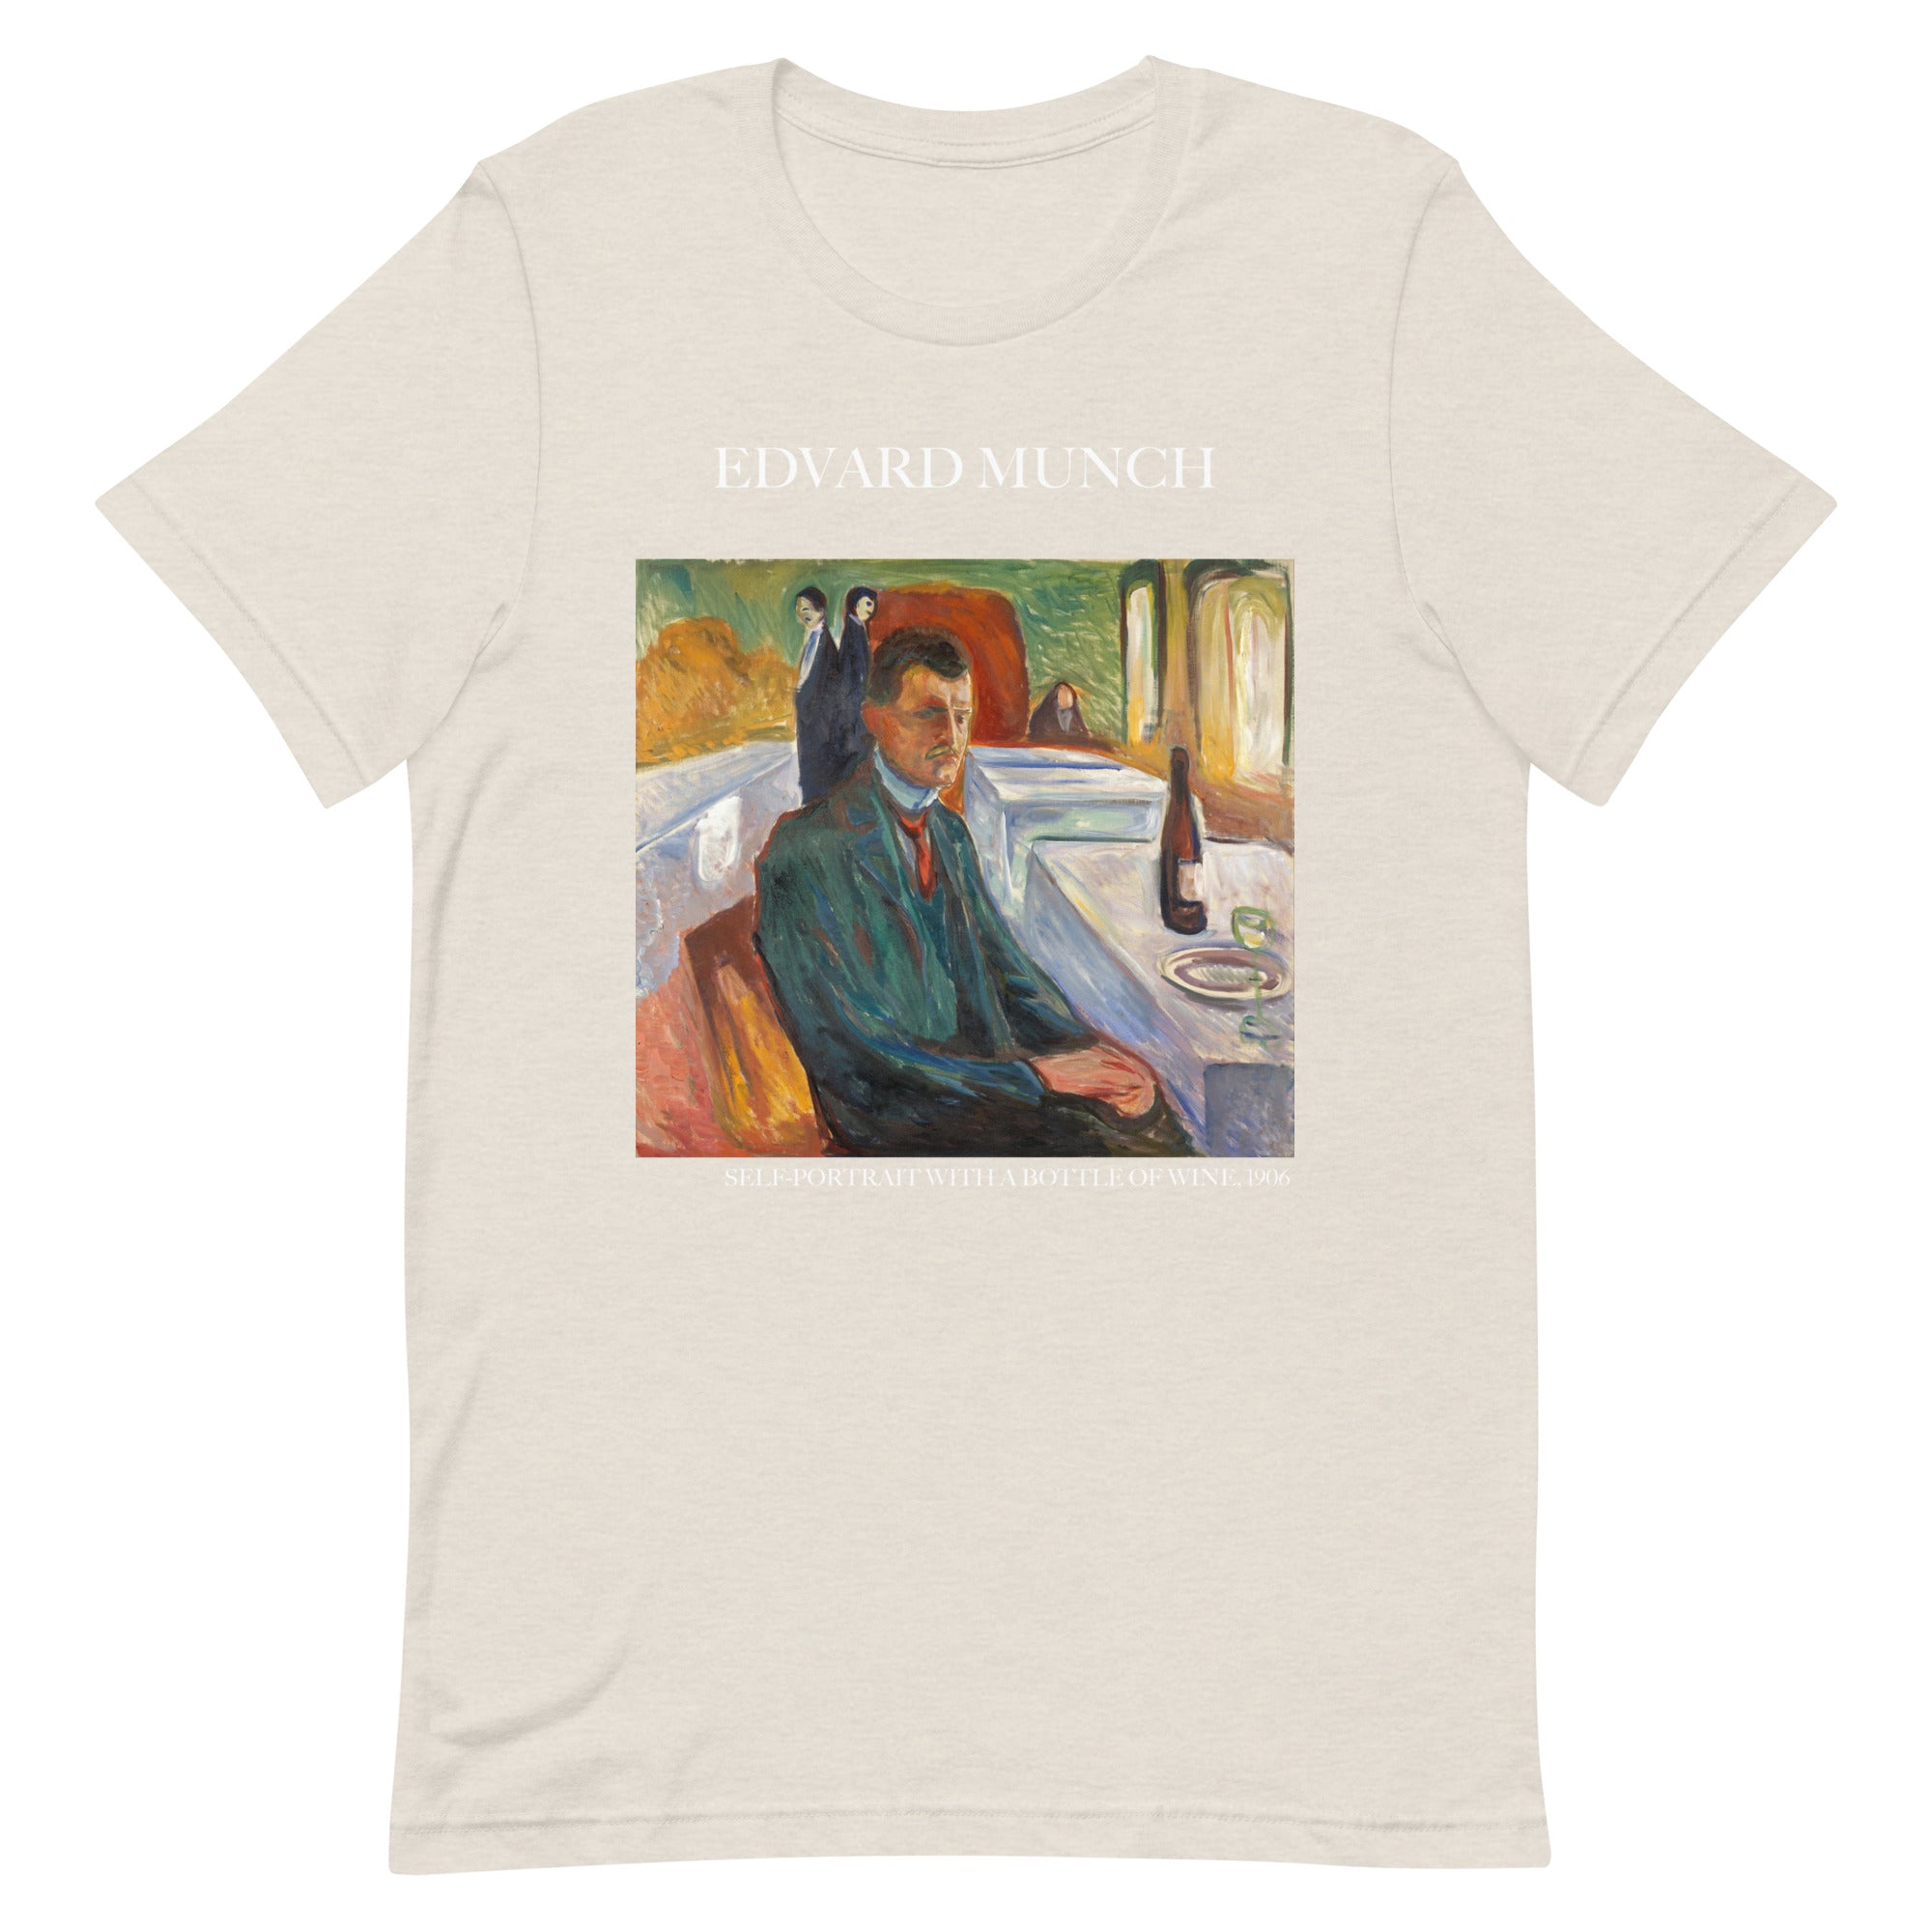 Edvard Munch 'Self-Portrait with a Bottle of Wine' Famous Painting T-Shirt | Unisex Classic Art Tee